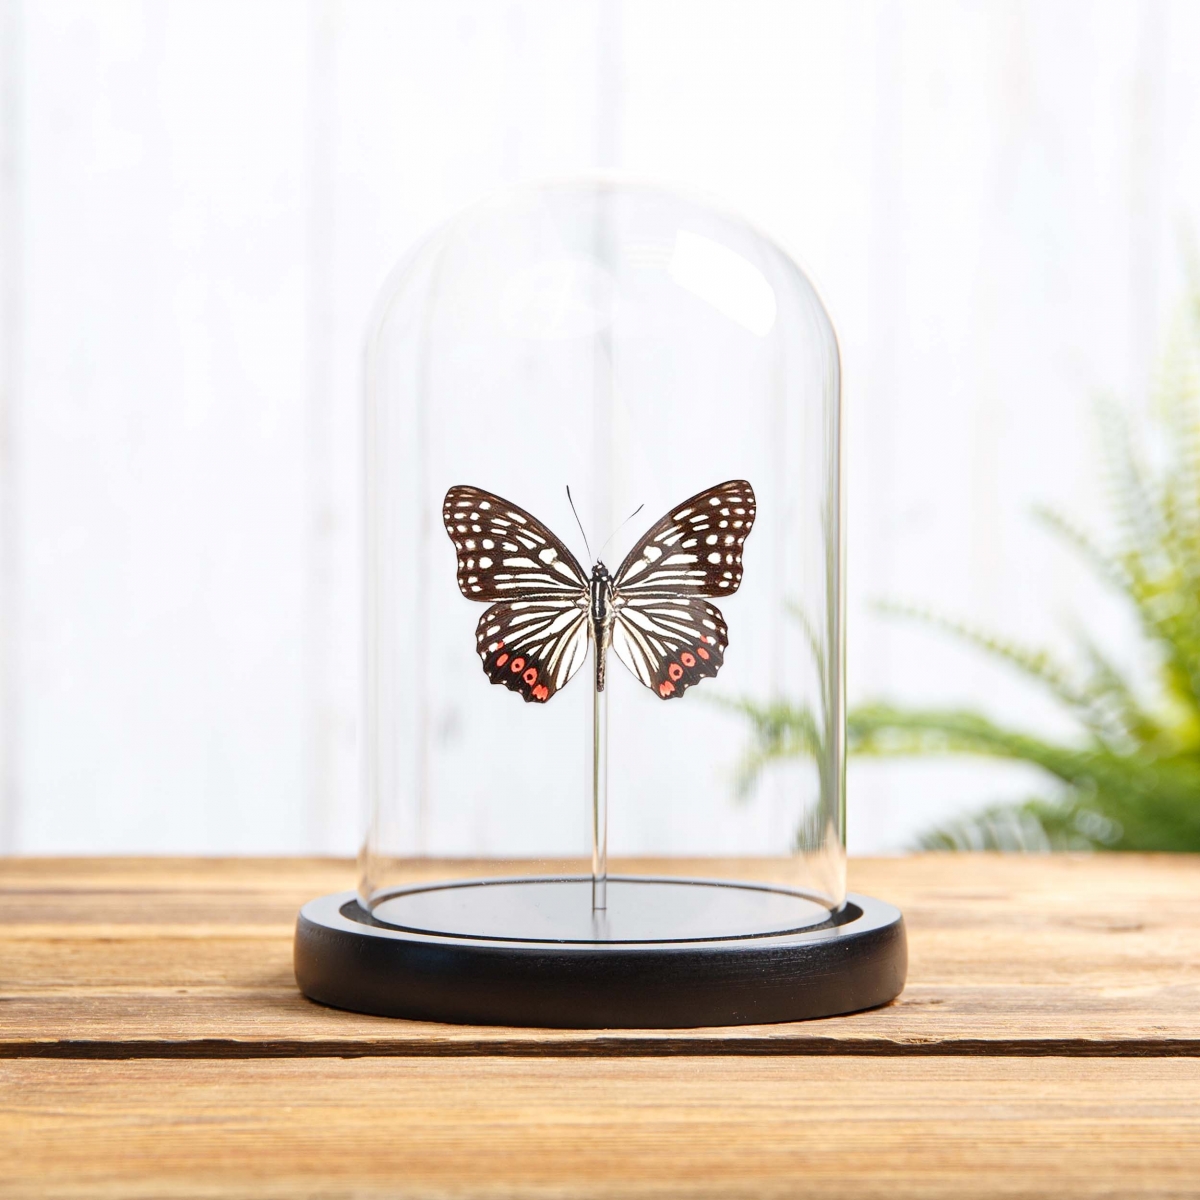 Minibeast Red Ring Skirt in Glass Dome with Wooden Base (Hestina assimilis)